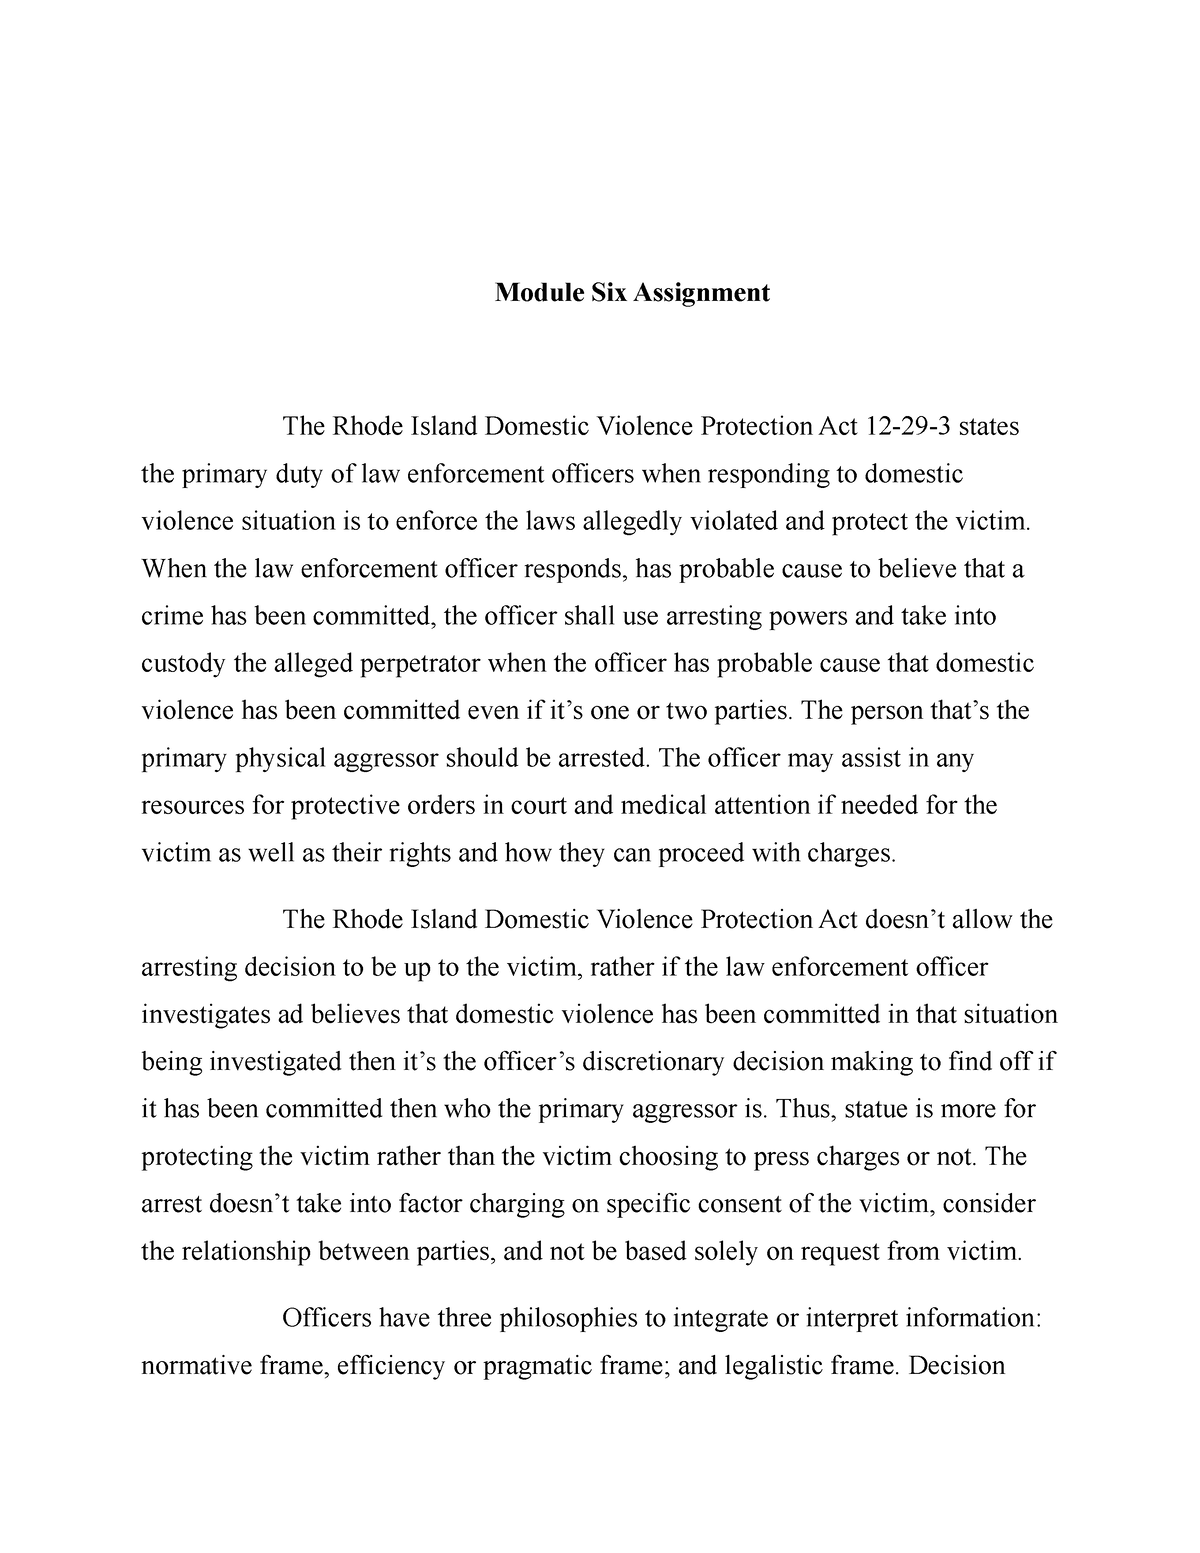 Cj 230 Mod Six Assignment Module Six Assignment The Rhode Island Domestic Violence Protection 0174